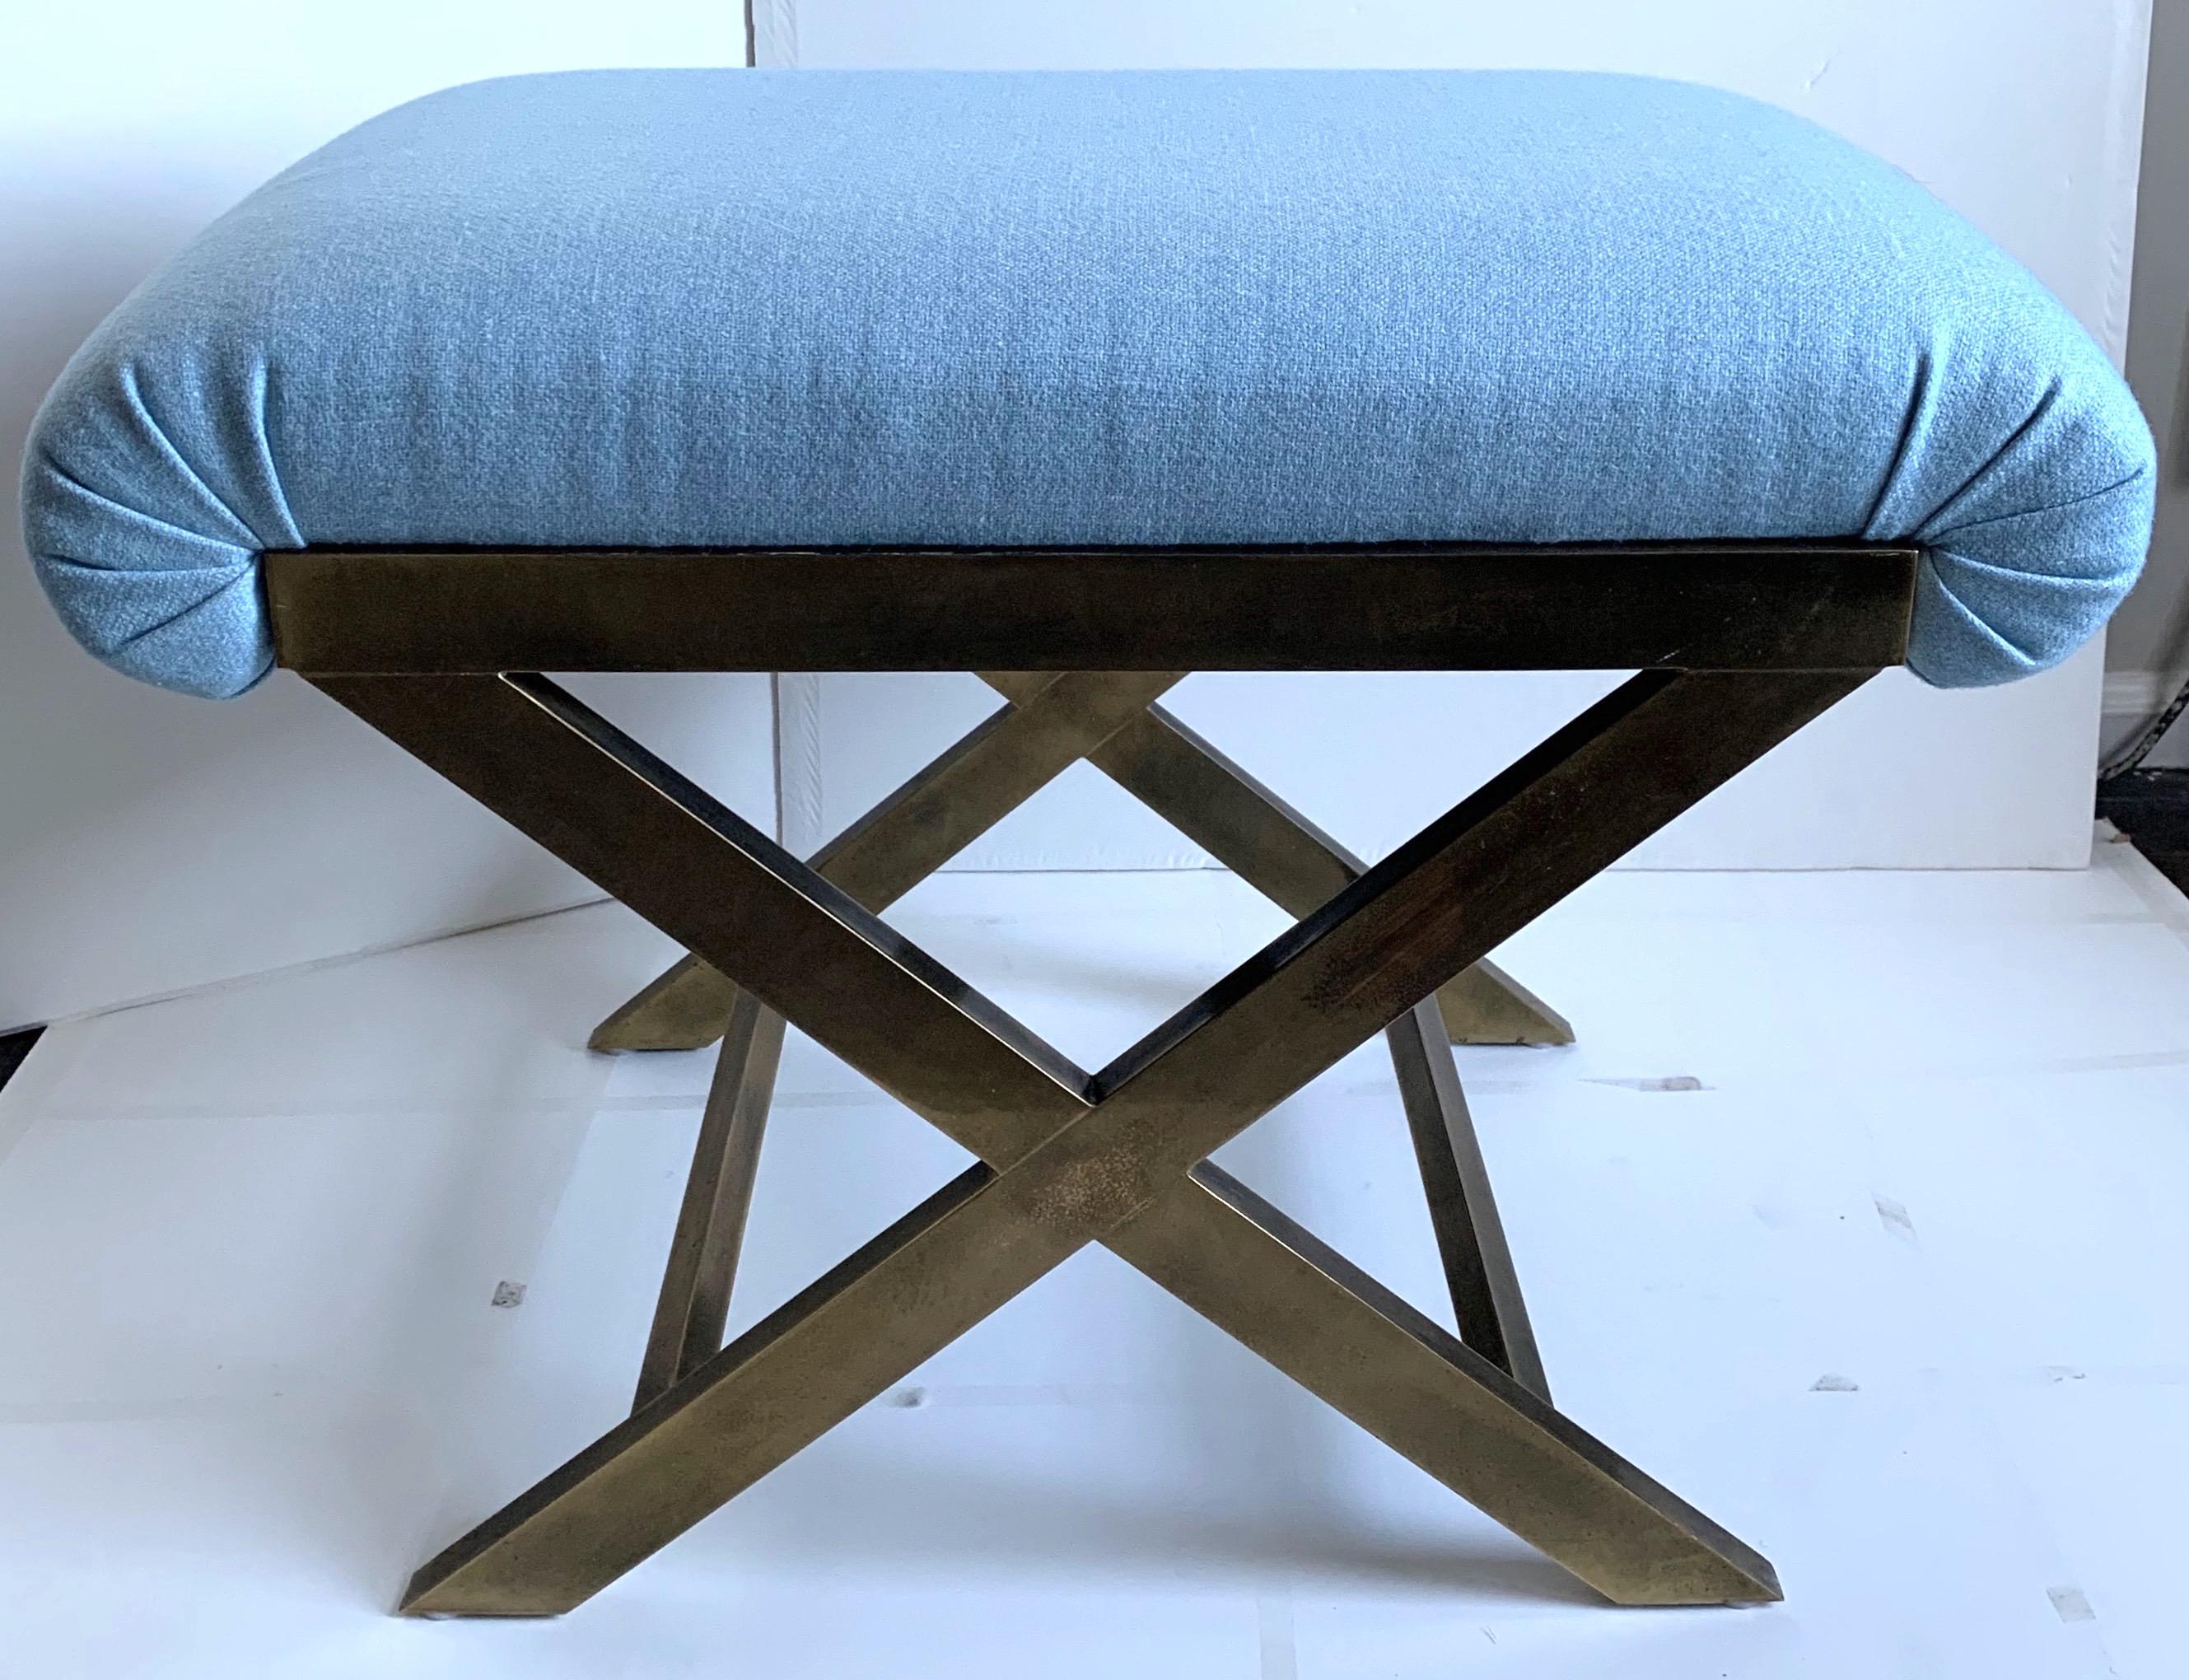 Pair of 1970s Italian brass X-benches. Overall burnished unpolished solid brass X-base frame. Newly upholstered in Raoul textiles ice blue (light blue) wool fabric. Each bench retains “Made in Italy” sticker.